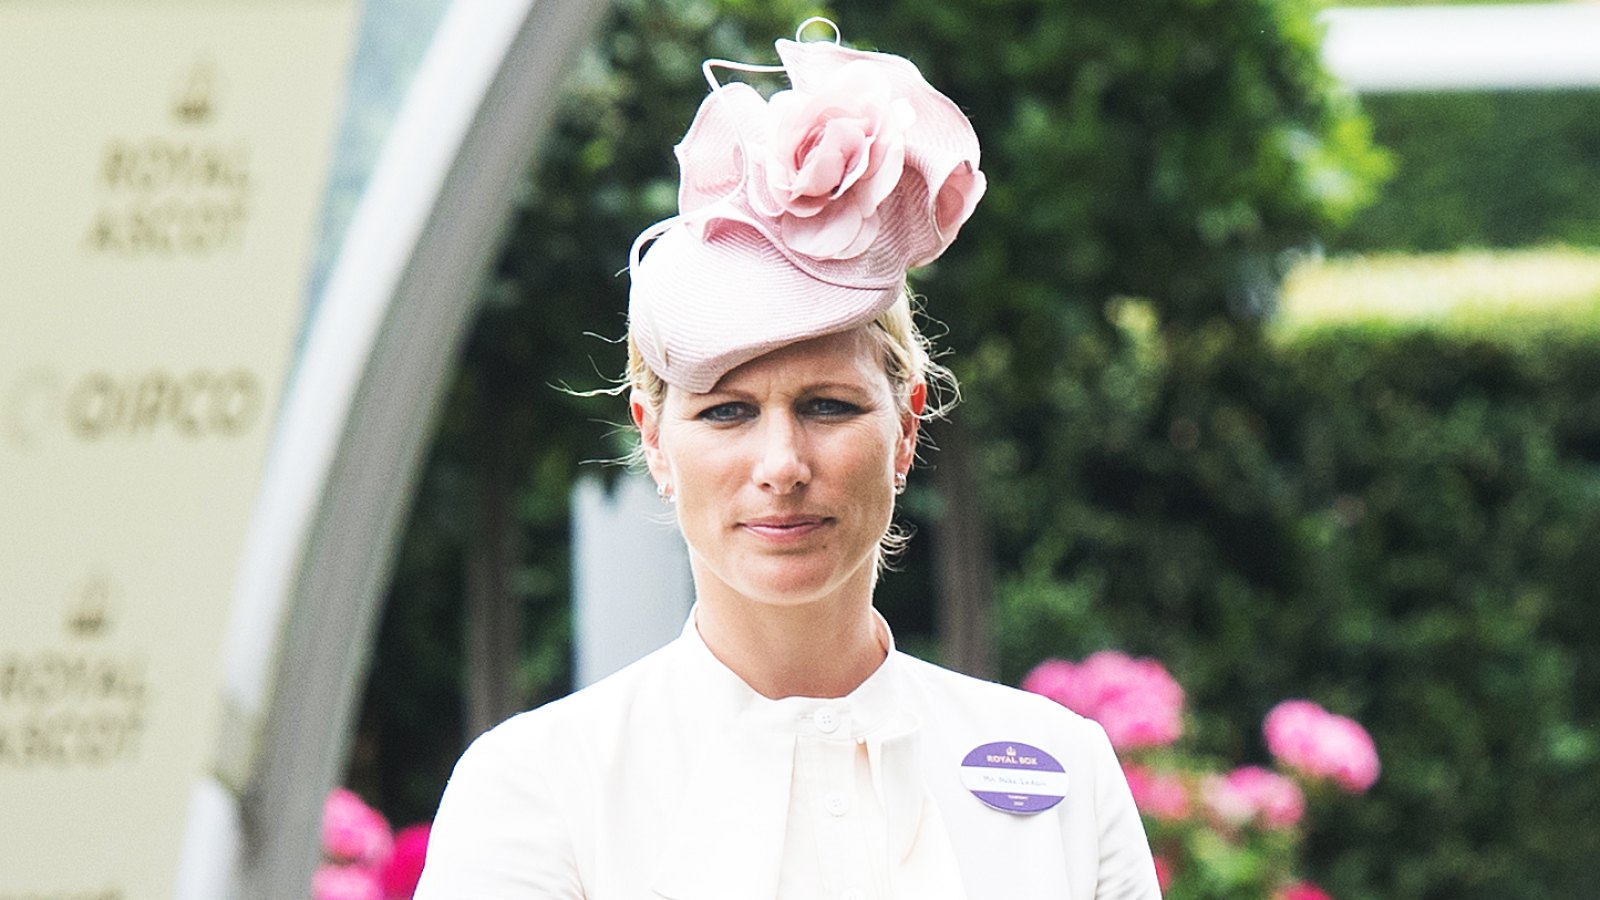 Zara Tindall Reveals Second Miscarriage